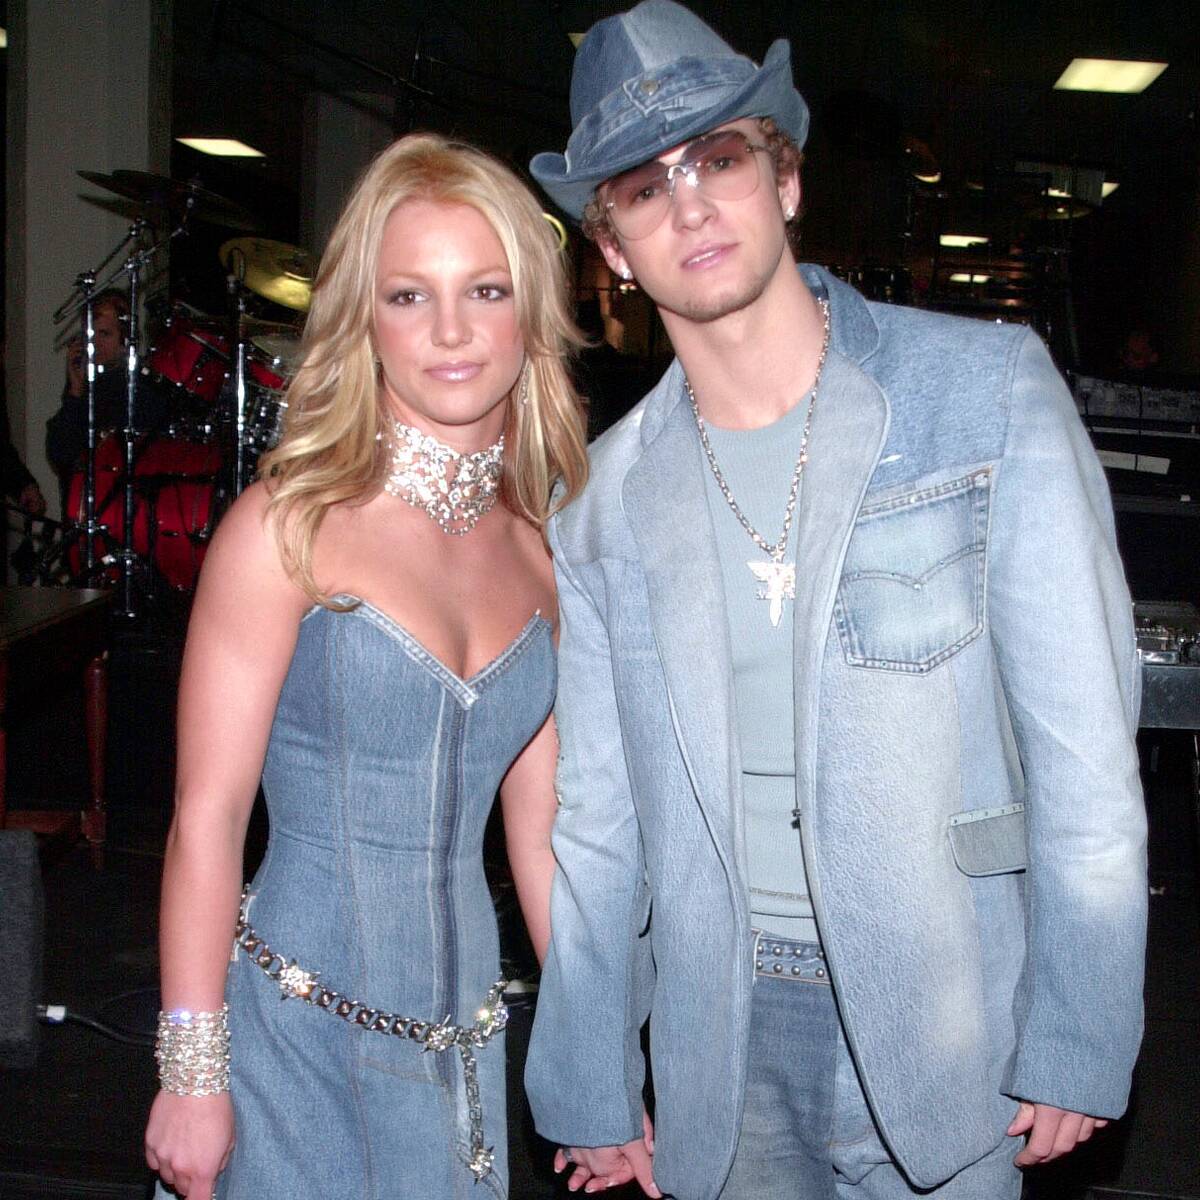 How Exactly Did Britney Spears and Justin Timberlake's Split Get So Nasty?